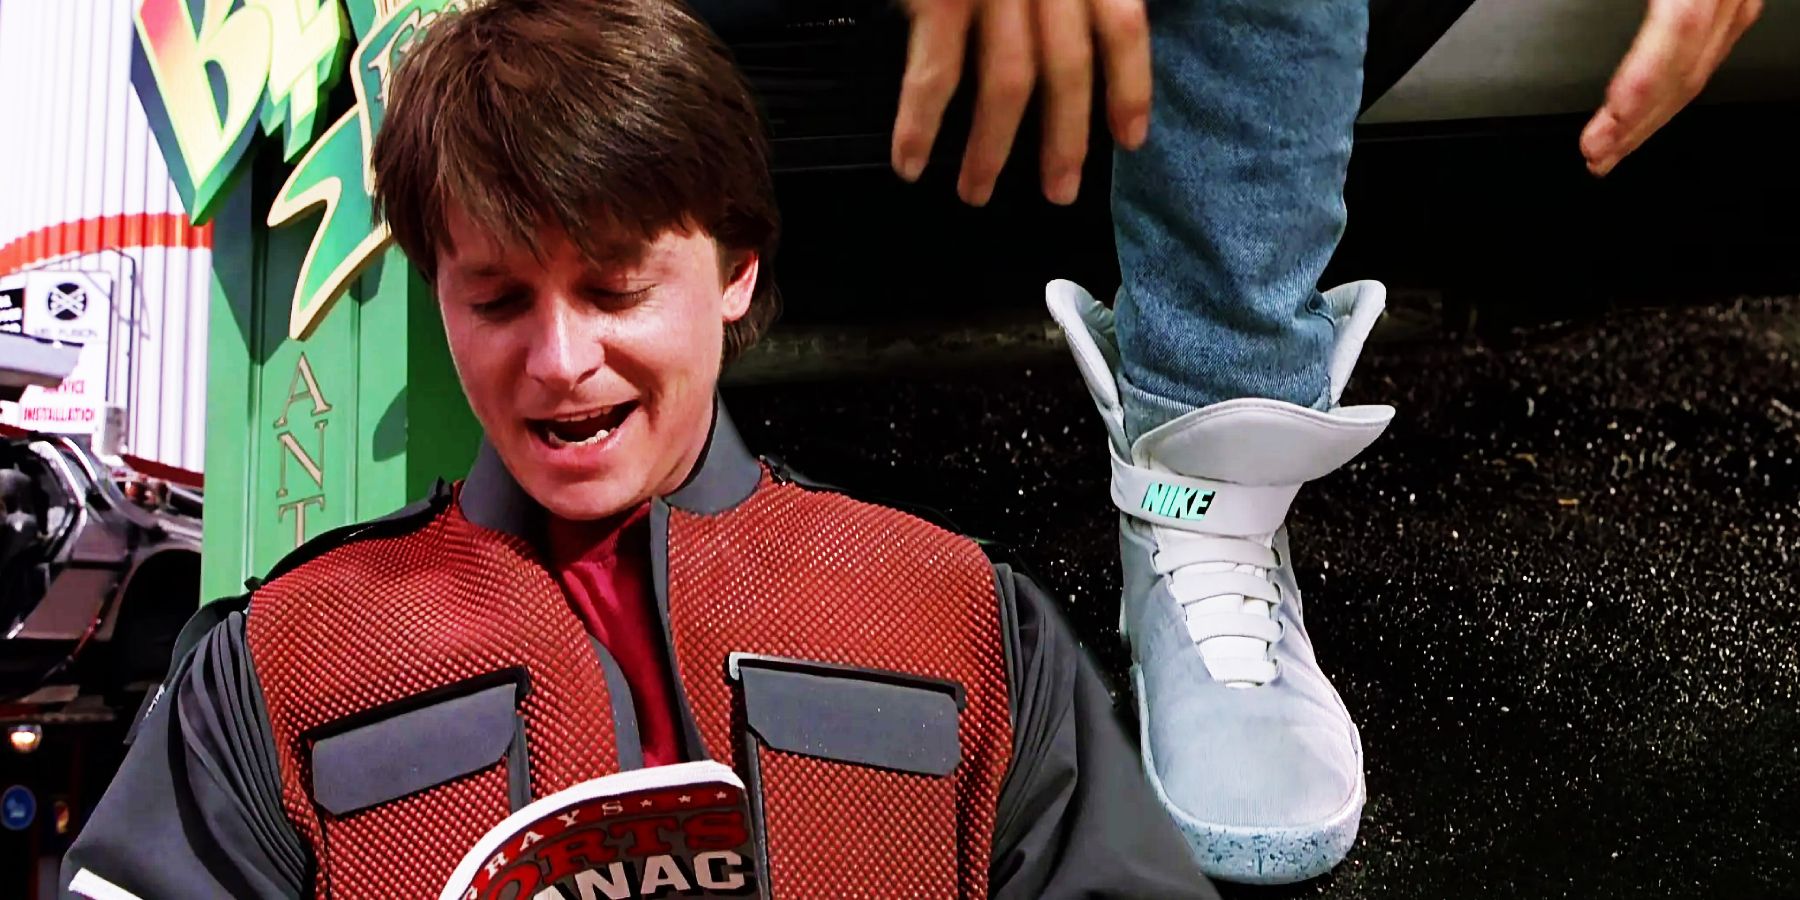 Marty McFly reads about the future and wears his self-lacing Nikes